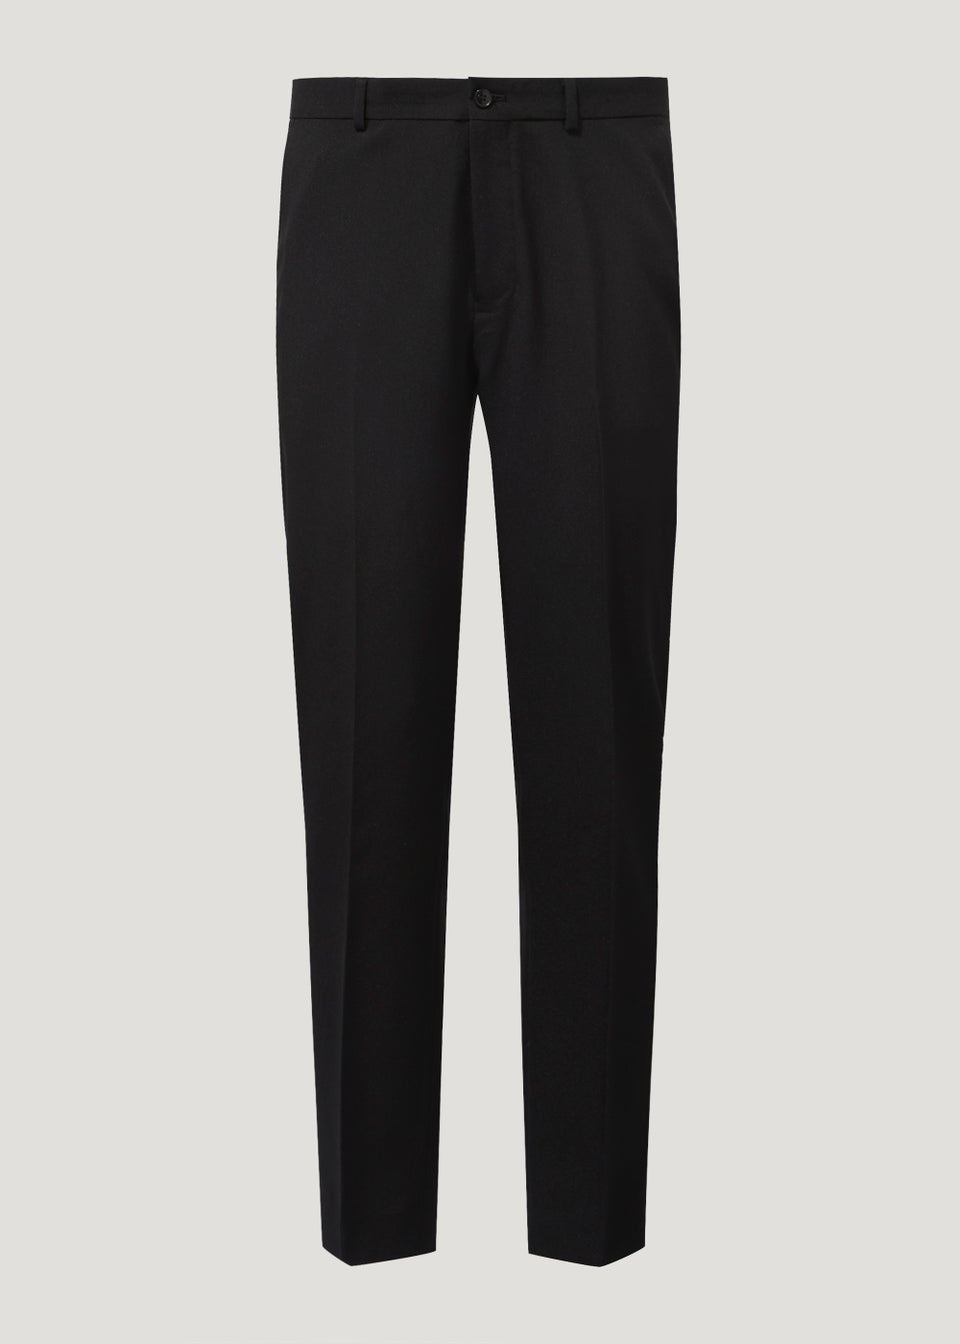 Taylor & Wright Panama Black Tailored Fit Suit Trousers